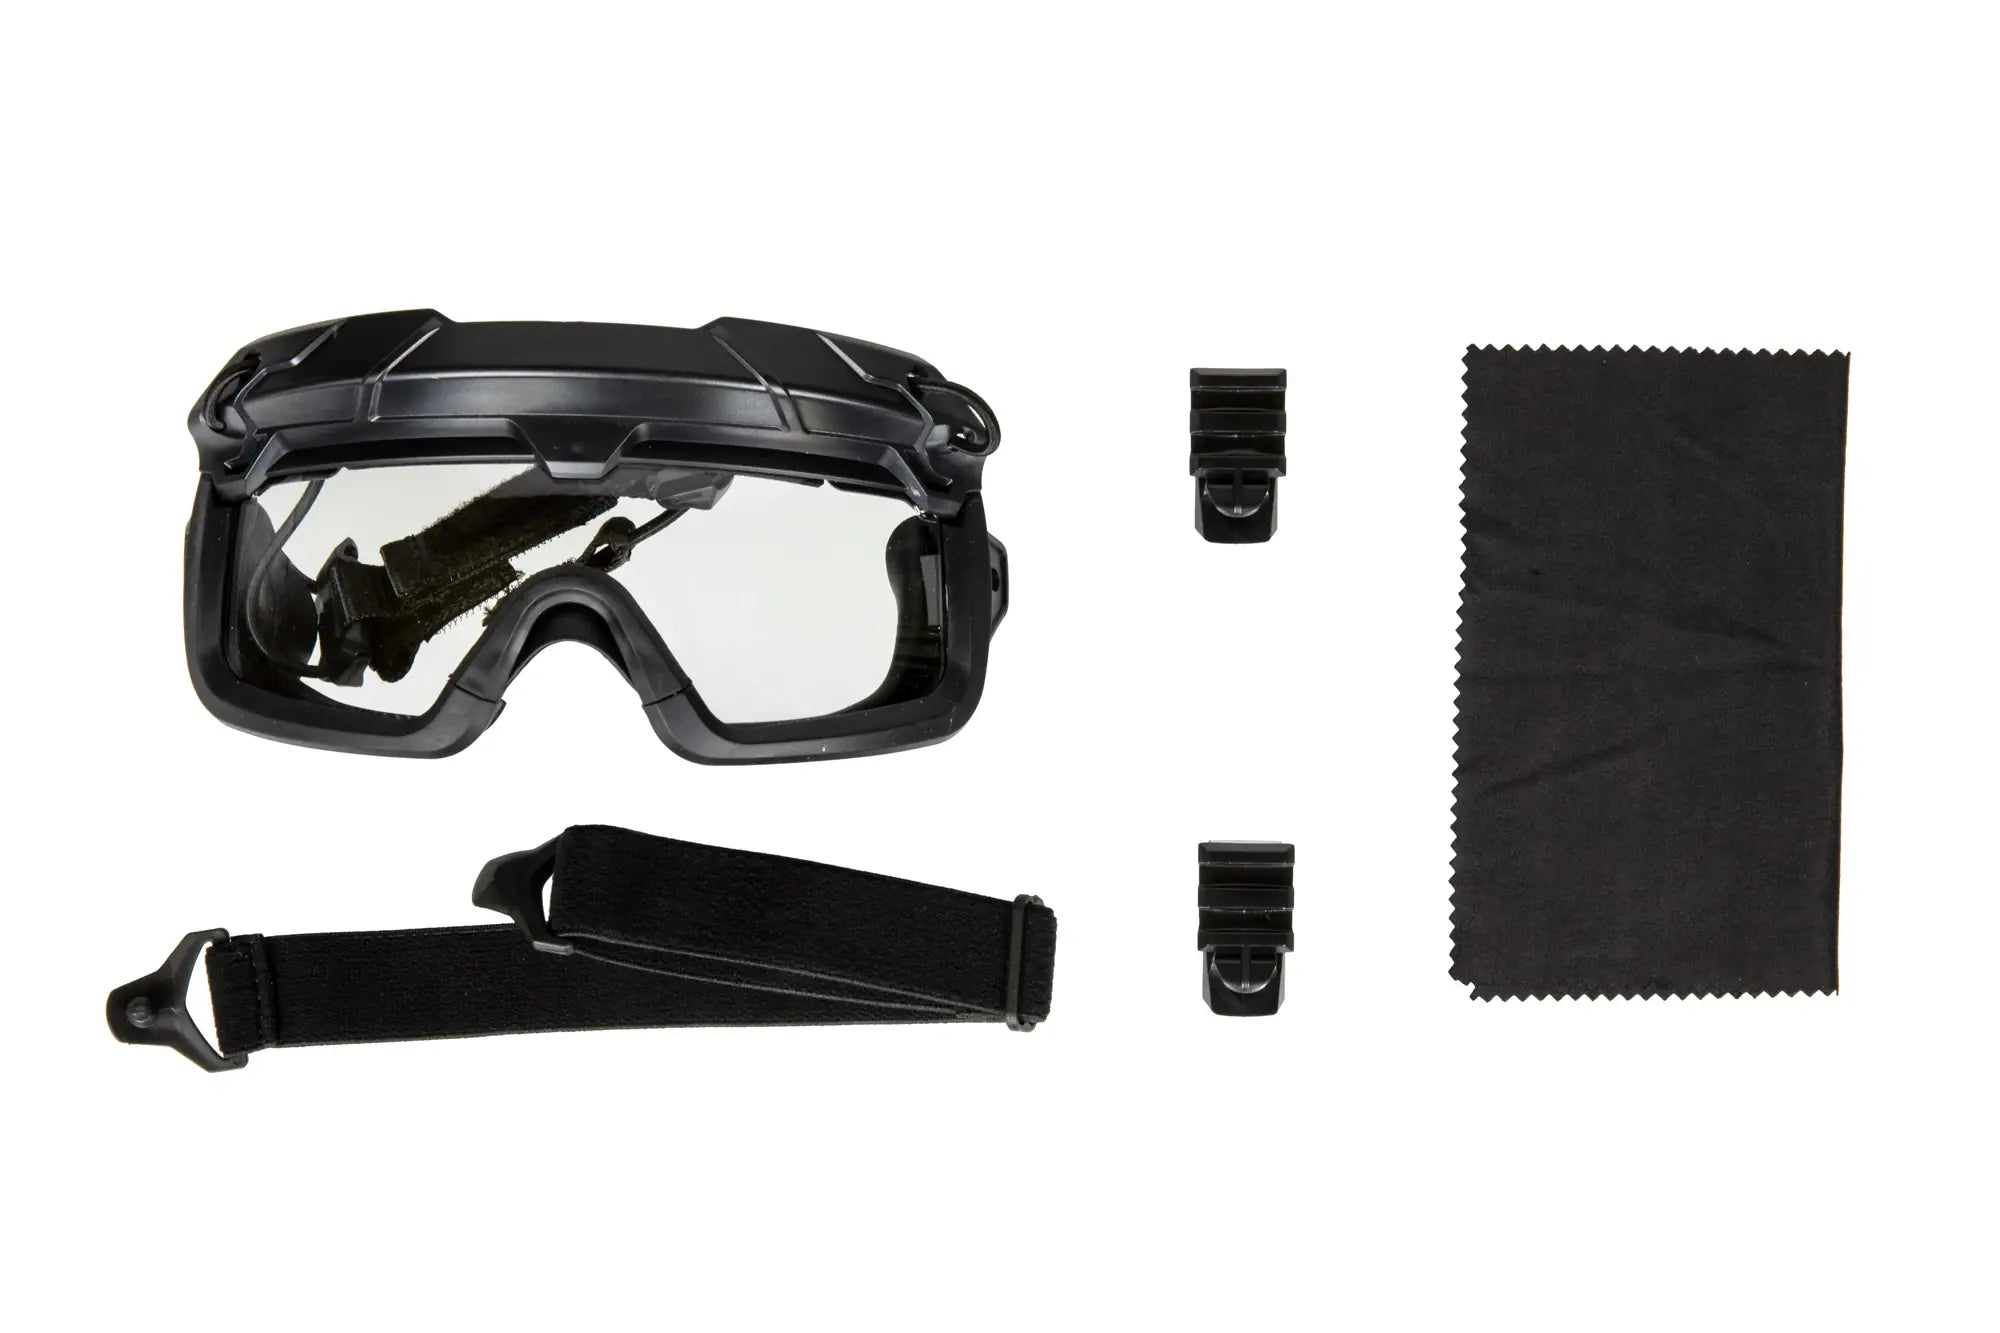 Tactical goggles 2 in 1 - Black-2